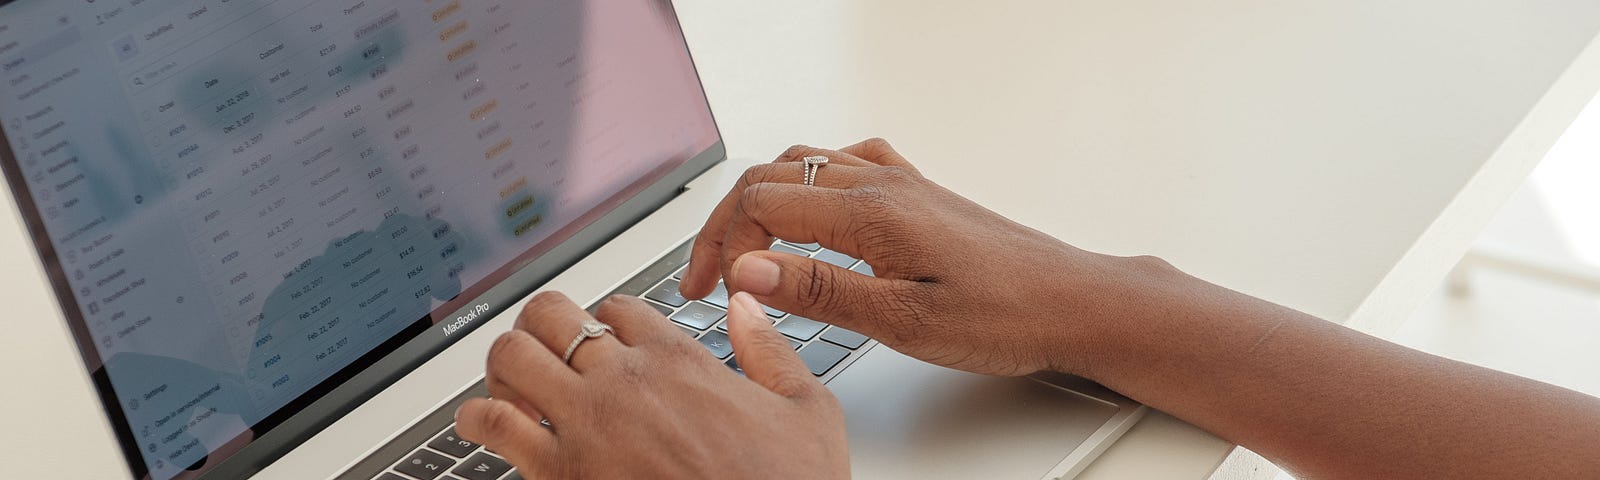 Hands typing on a Laptop